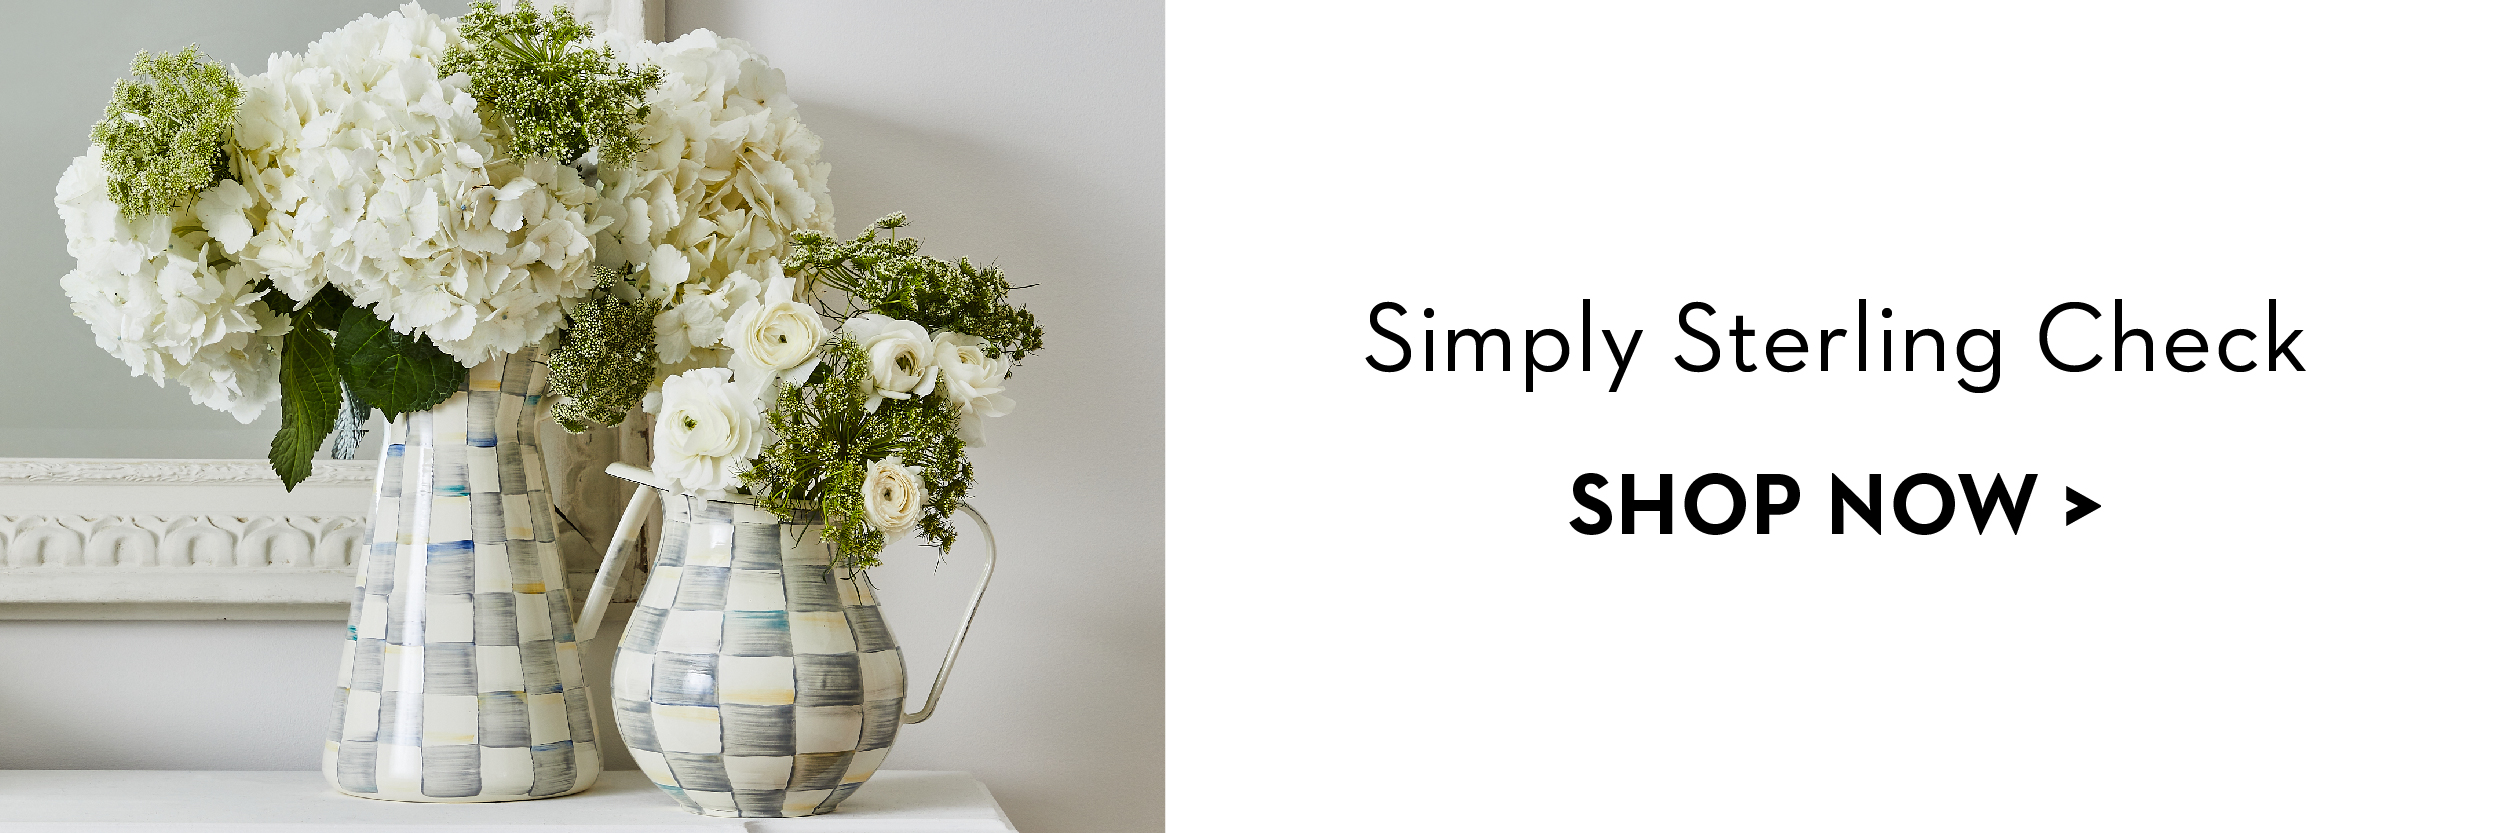 SIMPLY STERLING CHECK | SHOP NOW